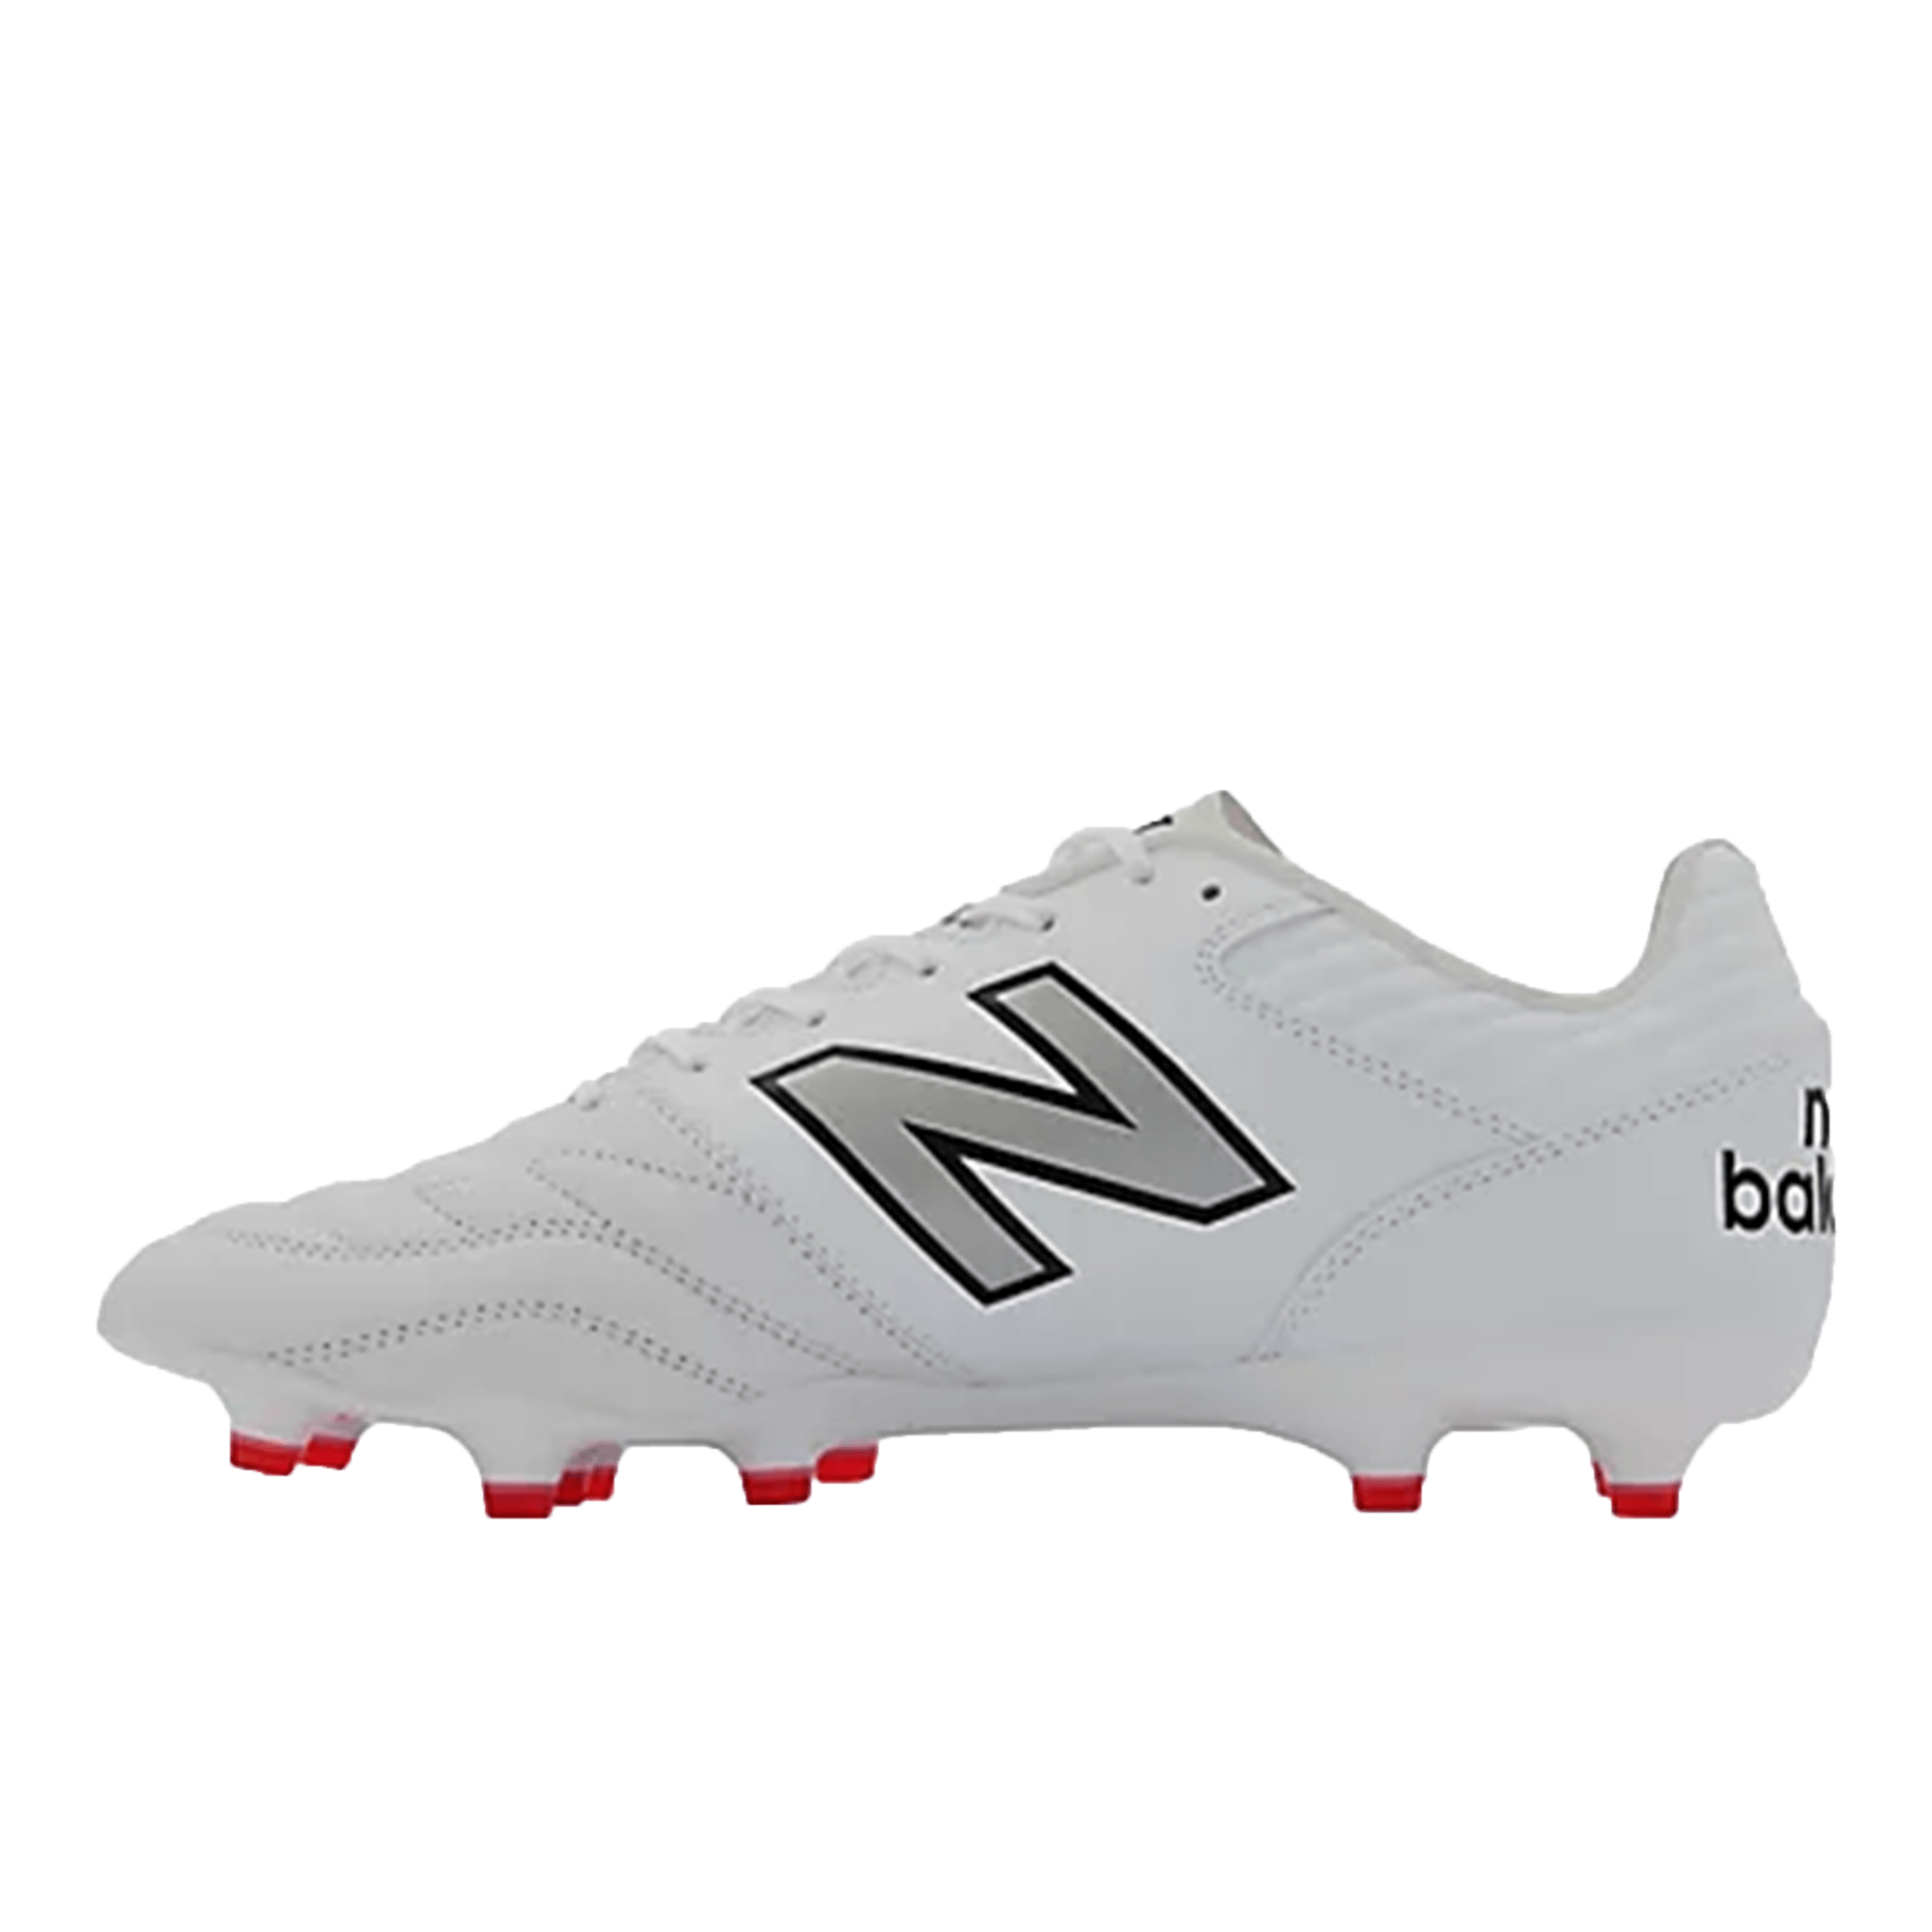 New Balance 442 V2 Pro Wide Rugby Cleat - Firm Ground Boot - Black